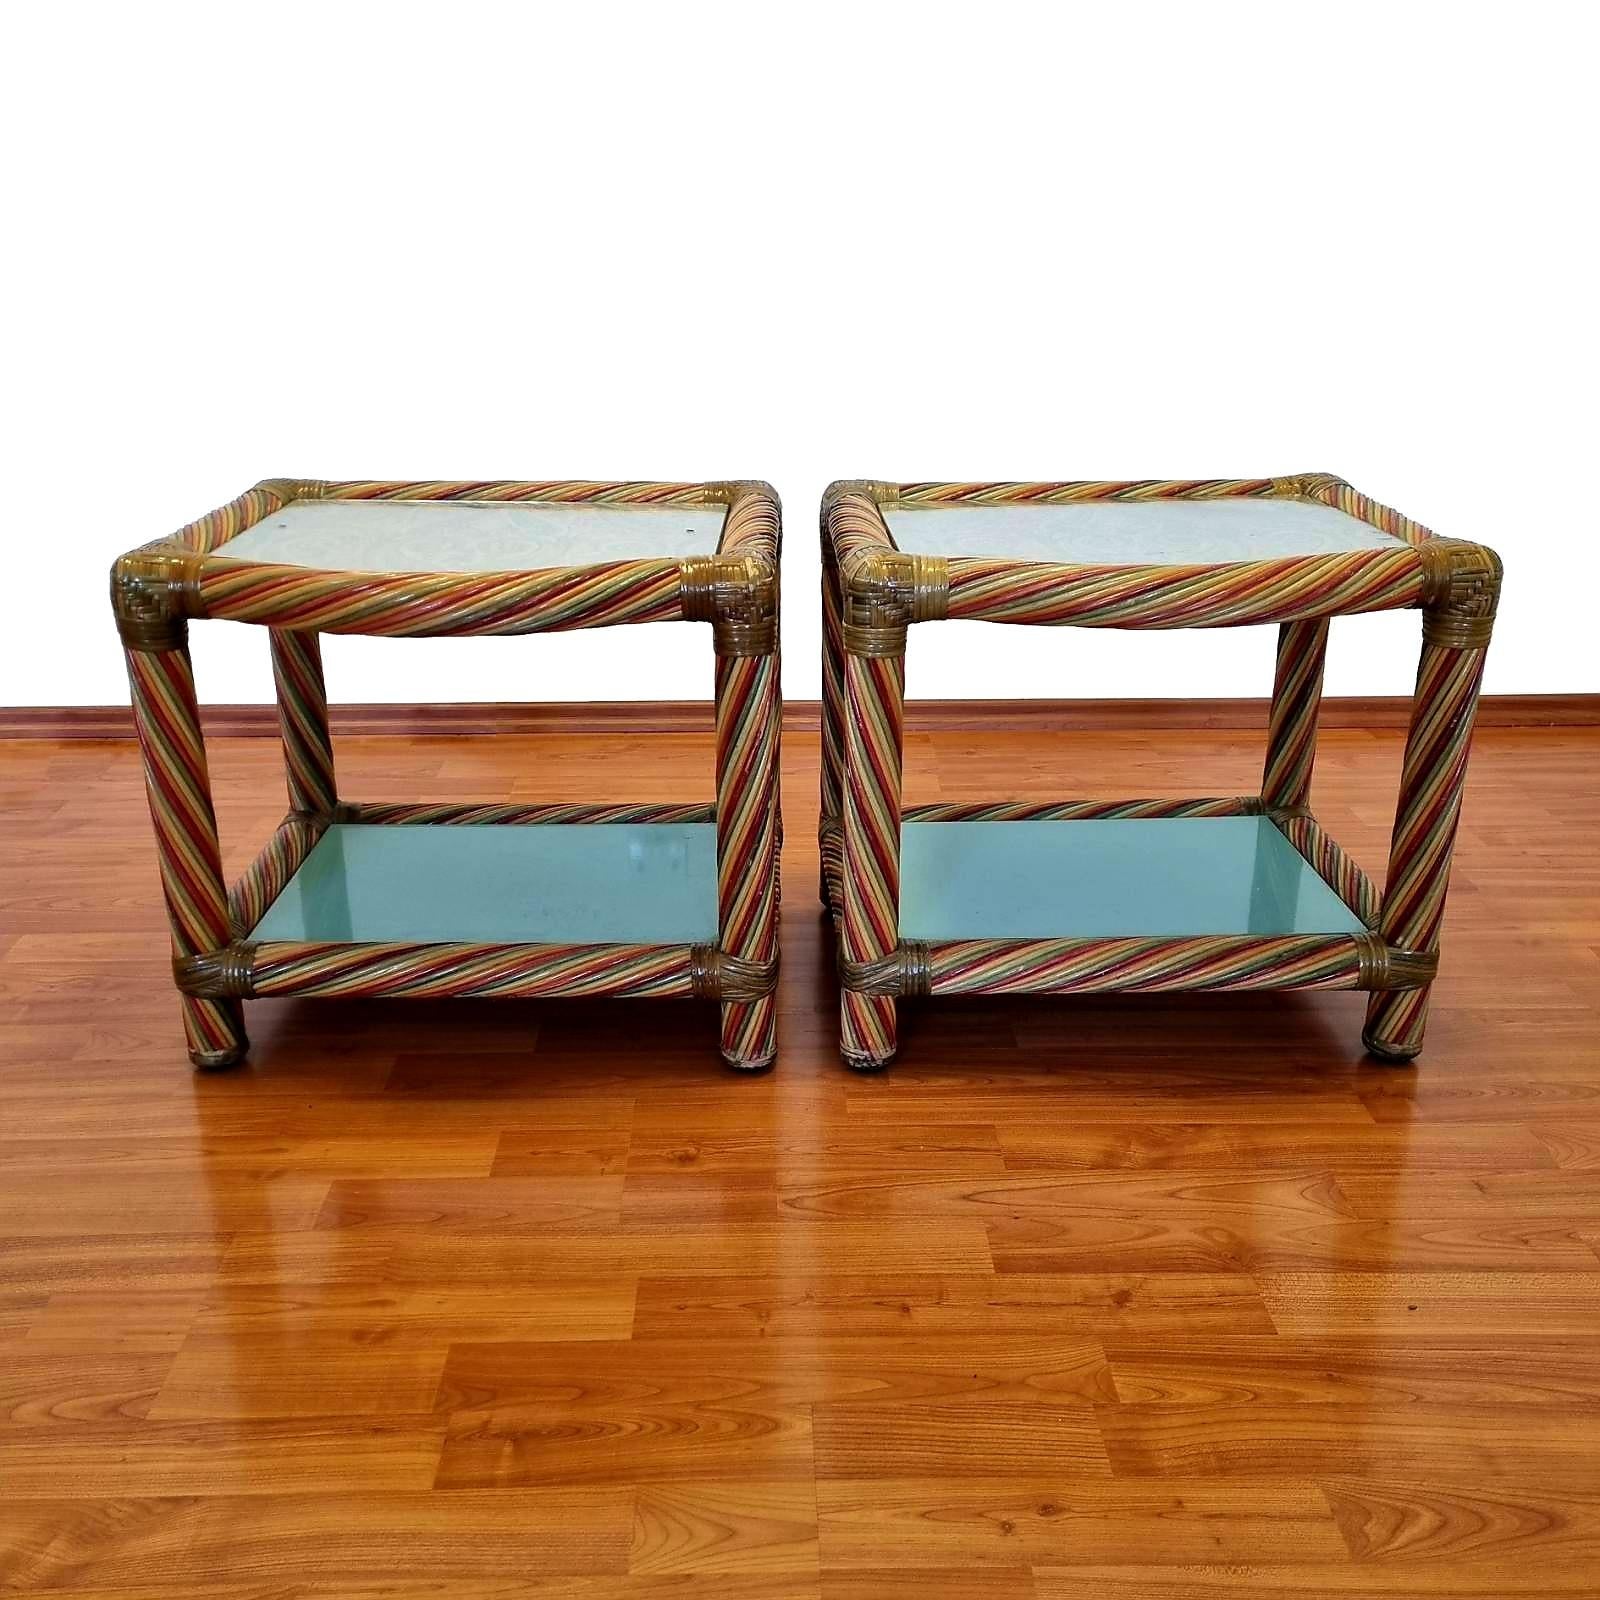 Vintage Cane Nightstands, Italian Rattan Bedside Tables, Italy 80s For Sale 2